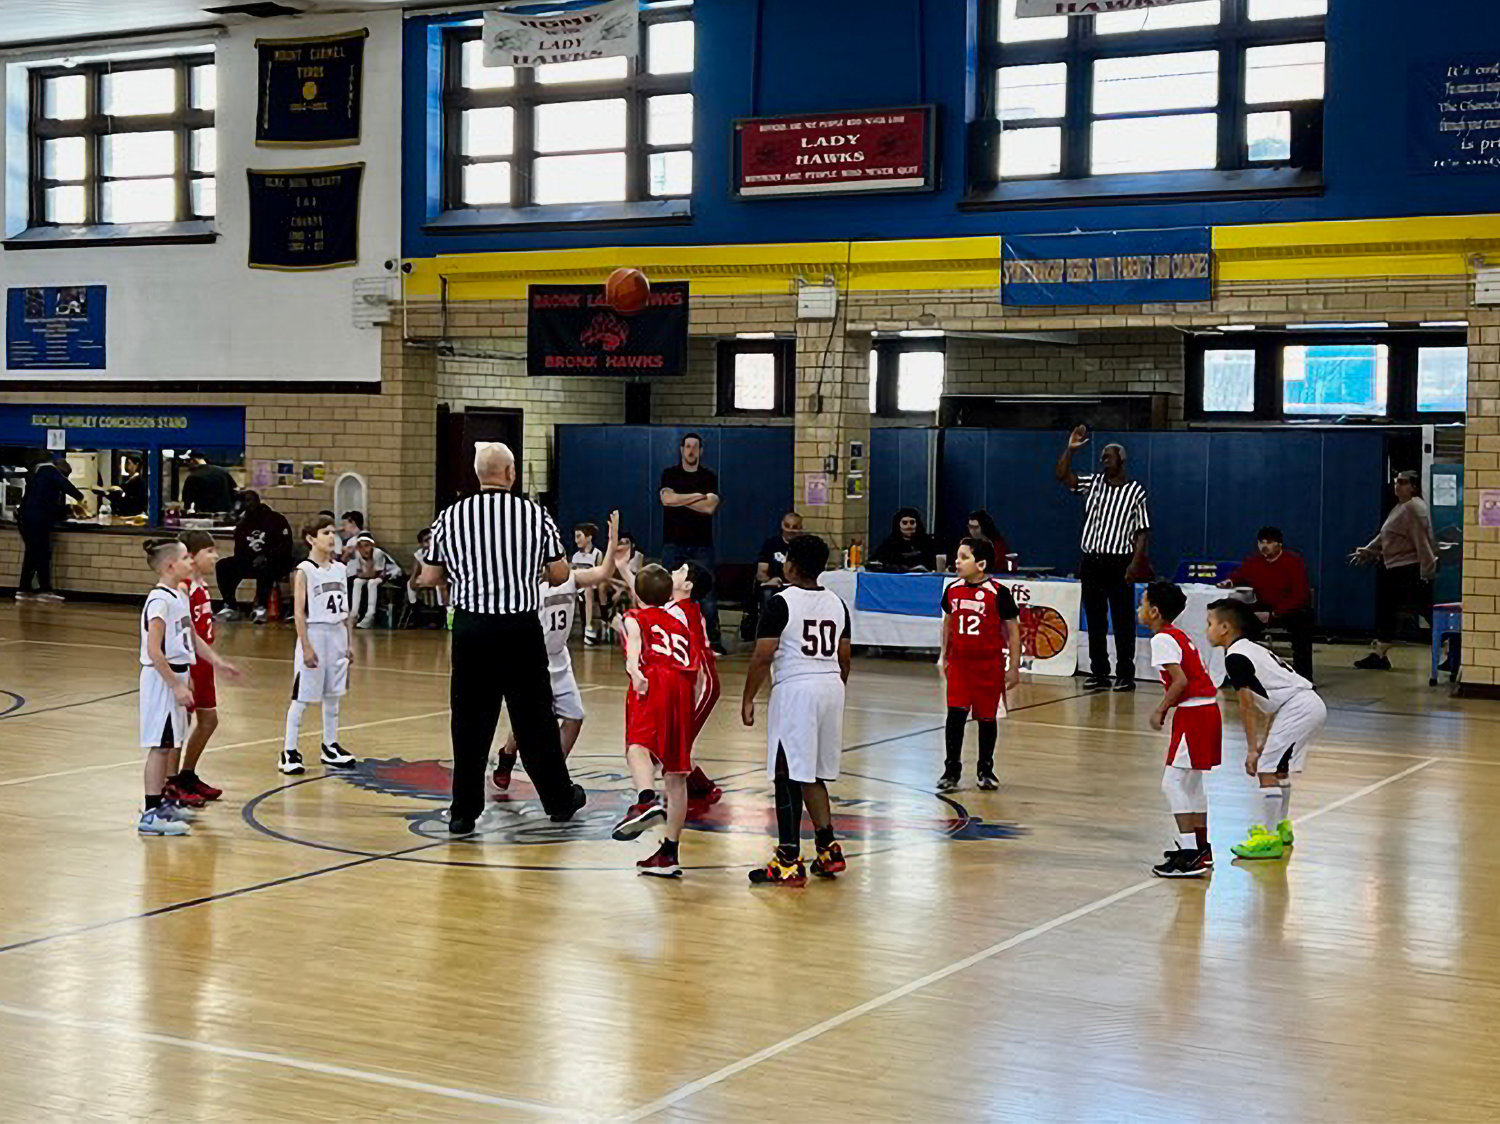 Players in the Bantam division of the CYO tip off during the Bronx county championship game Sunday between St. Margaret of Cortona and Saint Gabriel.